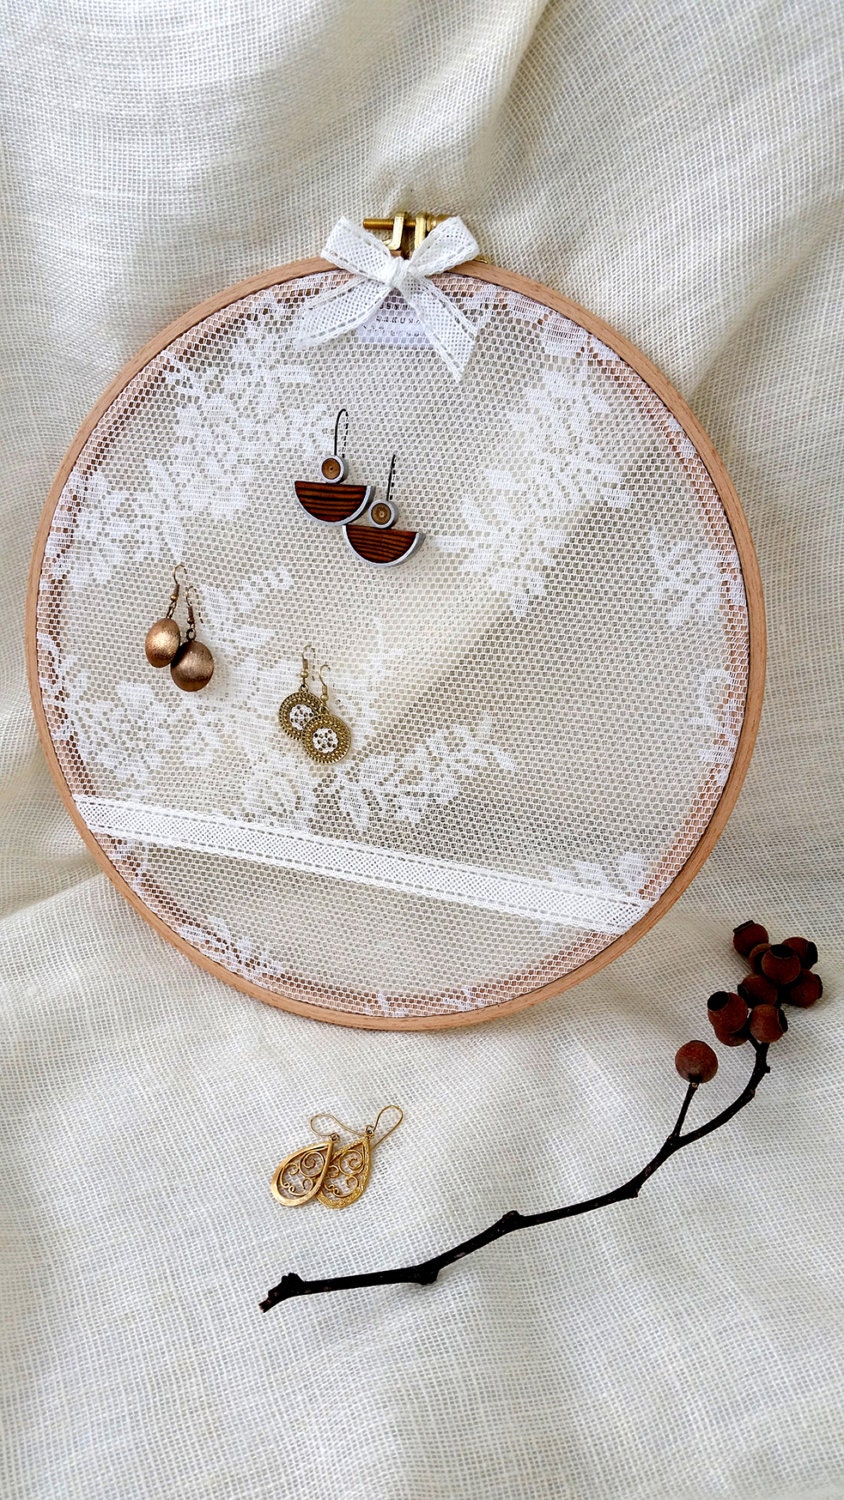 Embroidery Hoop Earring Holder, Jewelry Organizer, Suede Jewelry